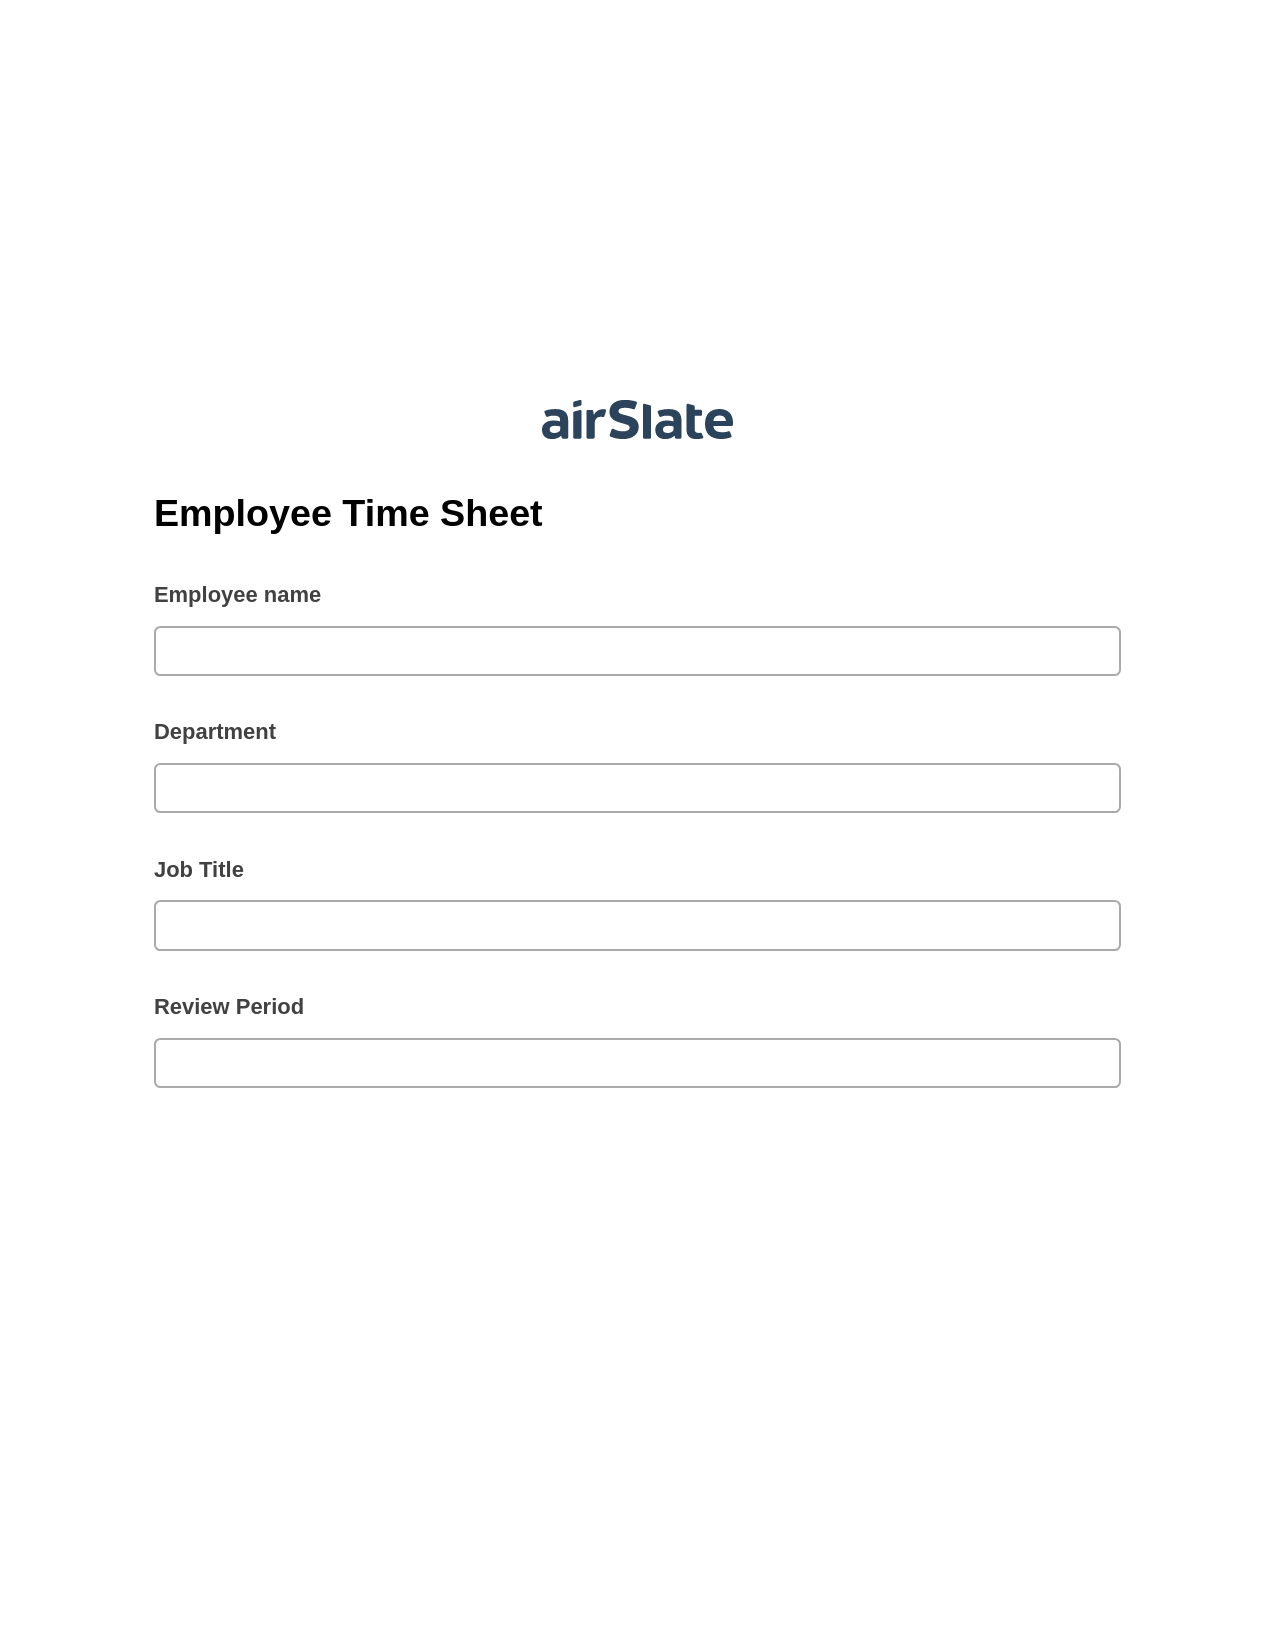 Multirole Employee Time Sheet Pre-fill from Google Sheets Bot, Update Audit Trail Bot, Archive to SharePoint Folder Bot